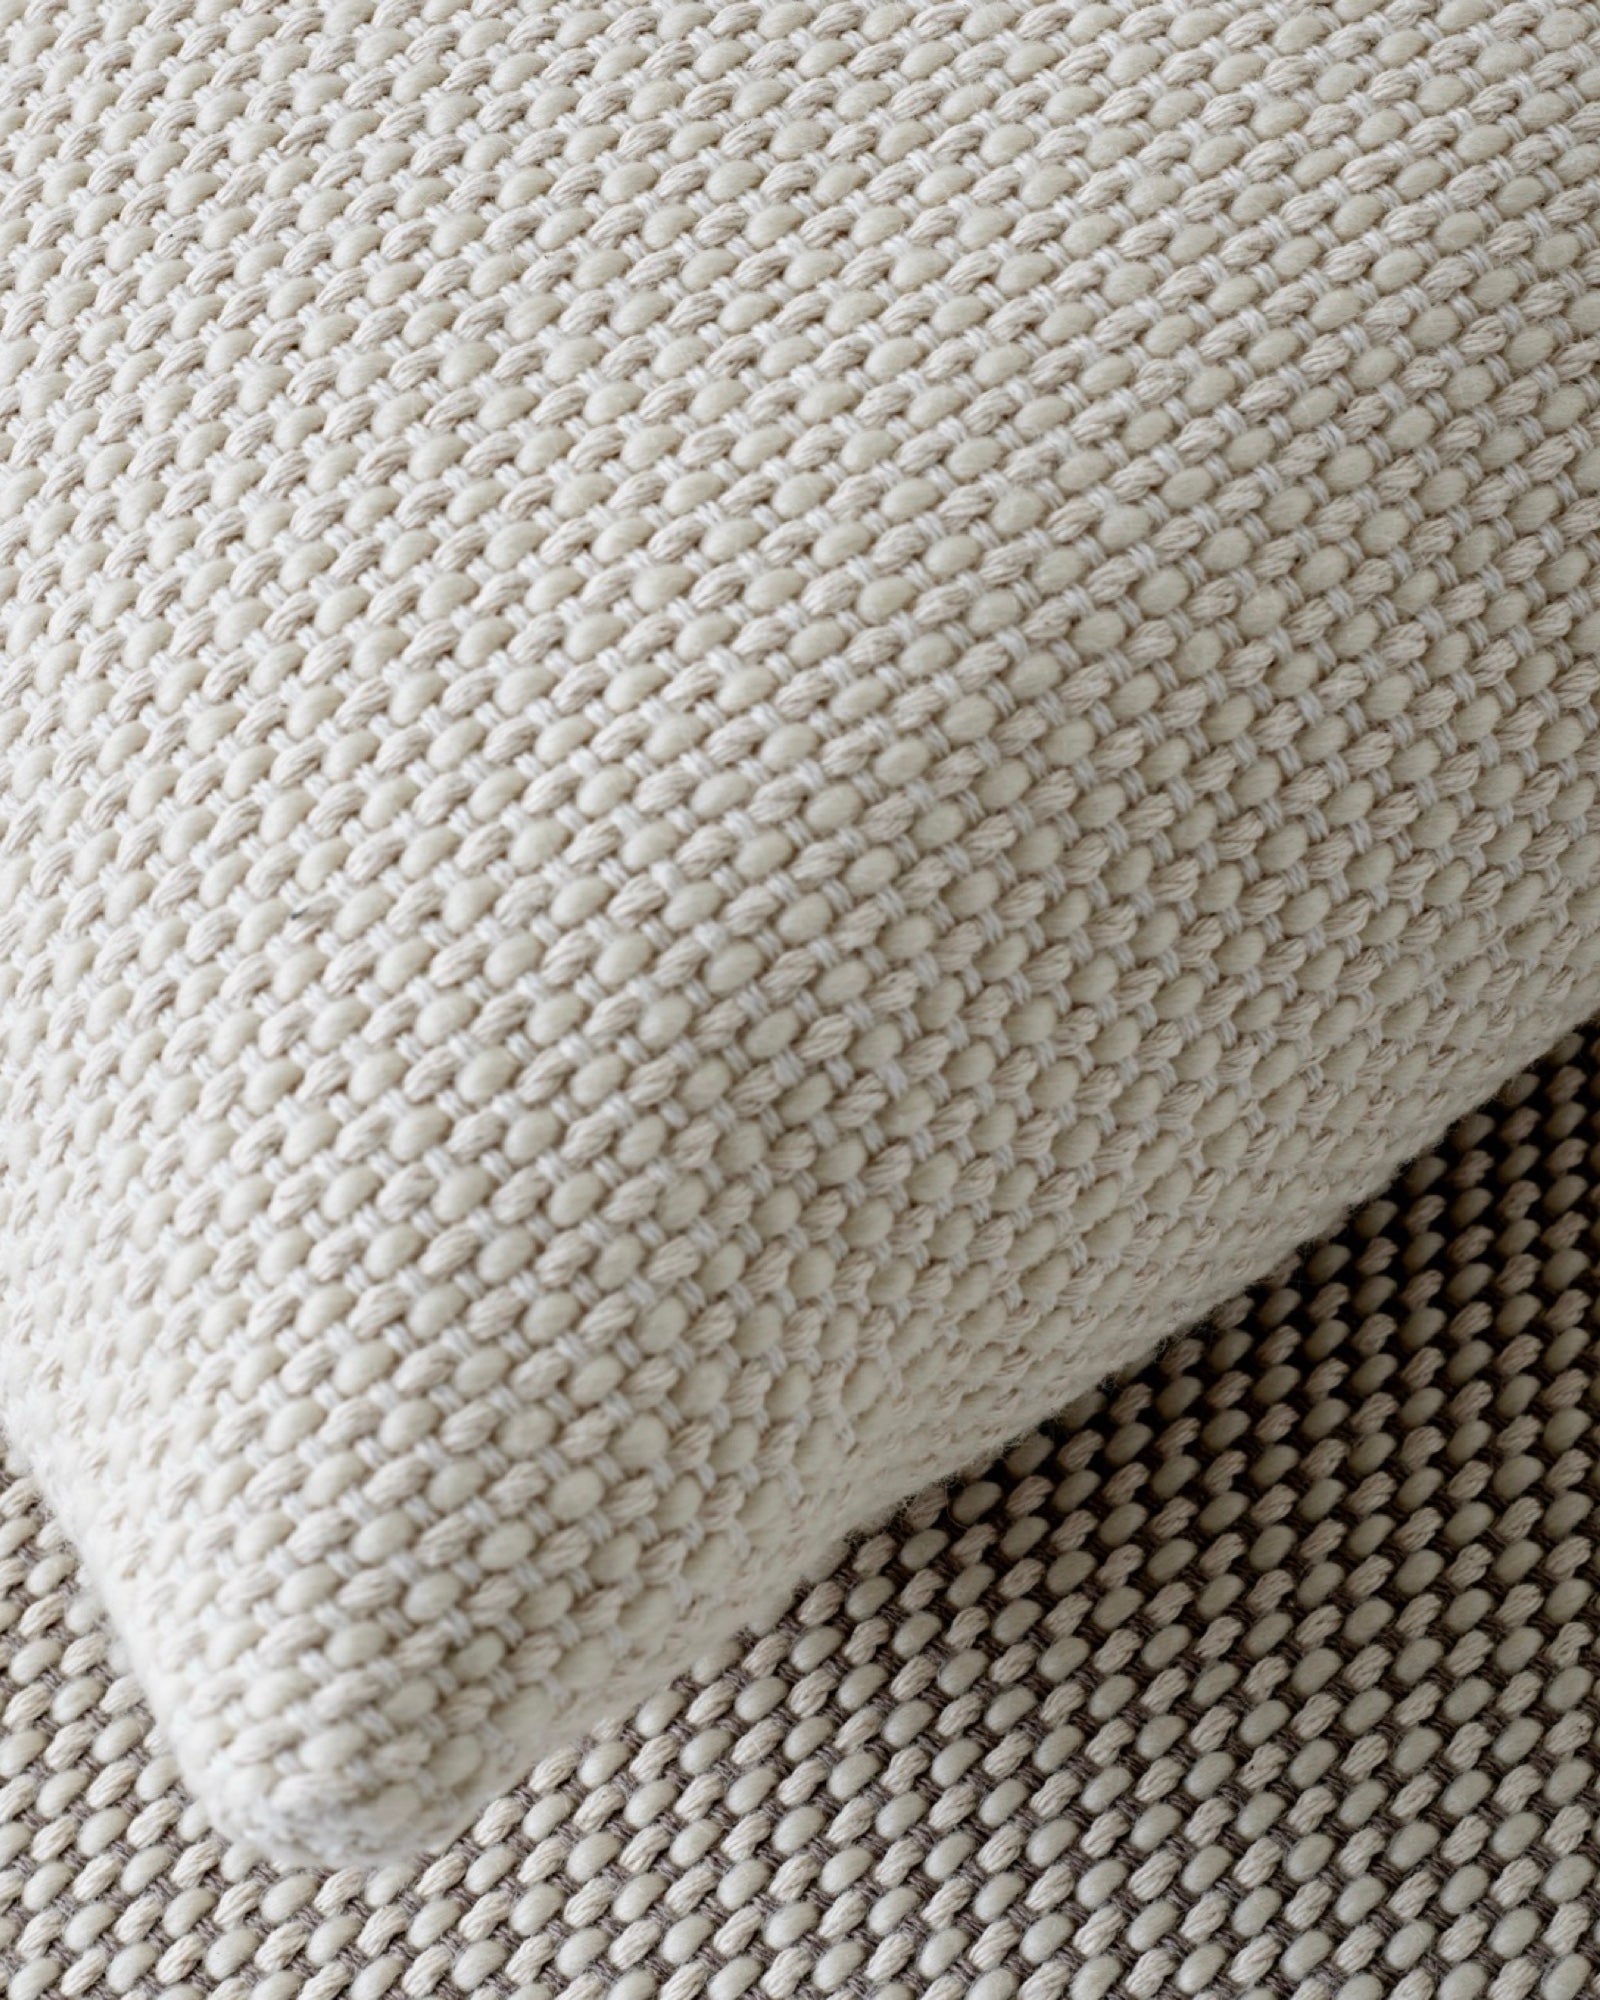 &Tradition Collect Cushion - Weave